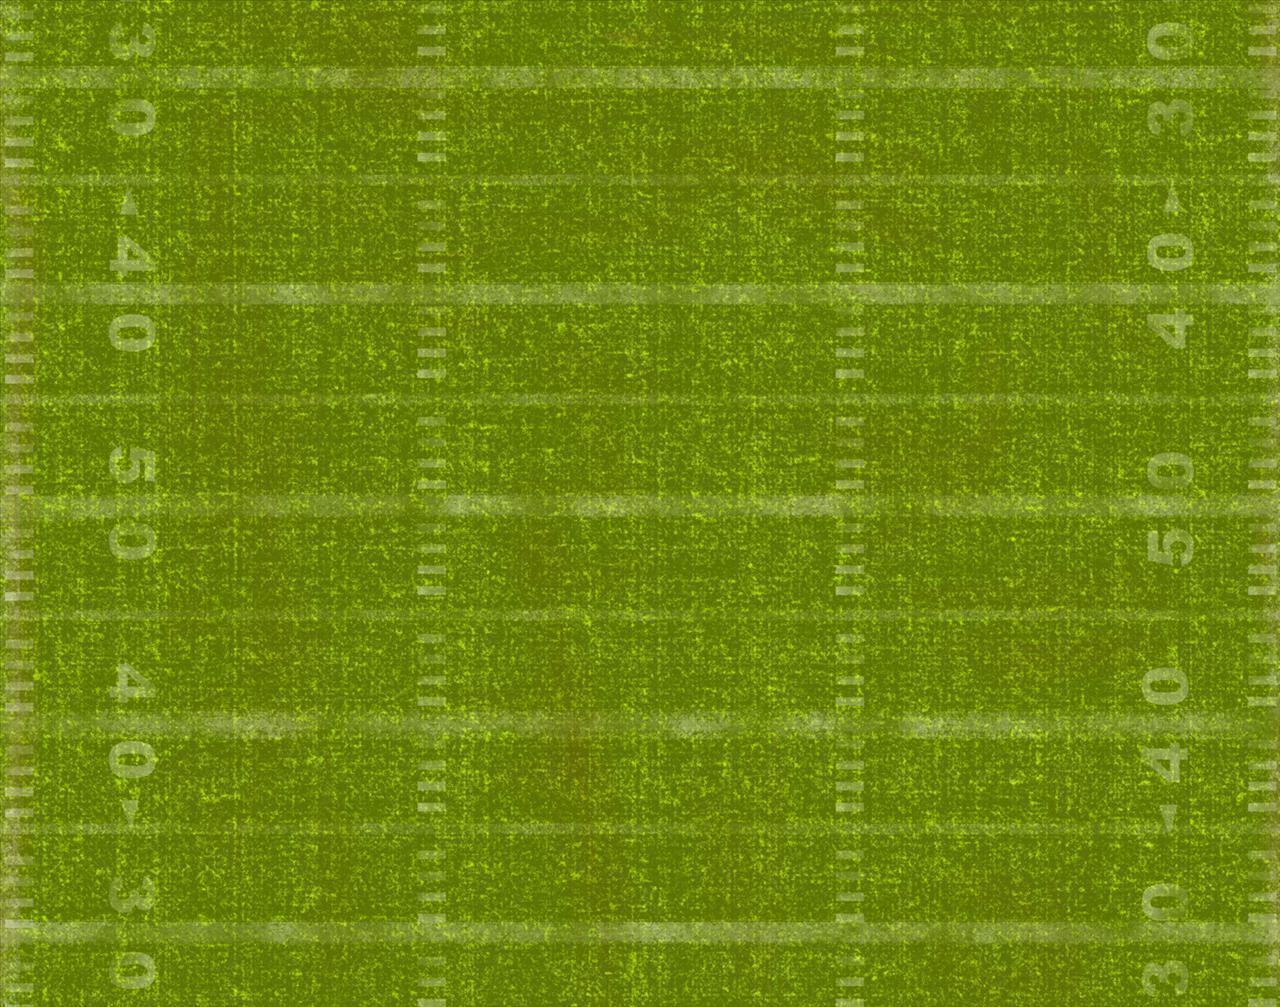 Football Field Background For Powerpoint Widescreen 2 HD